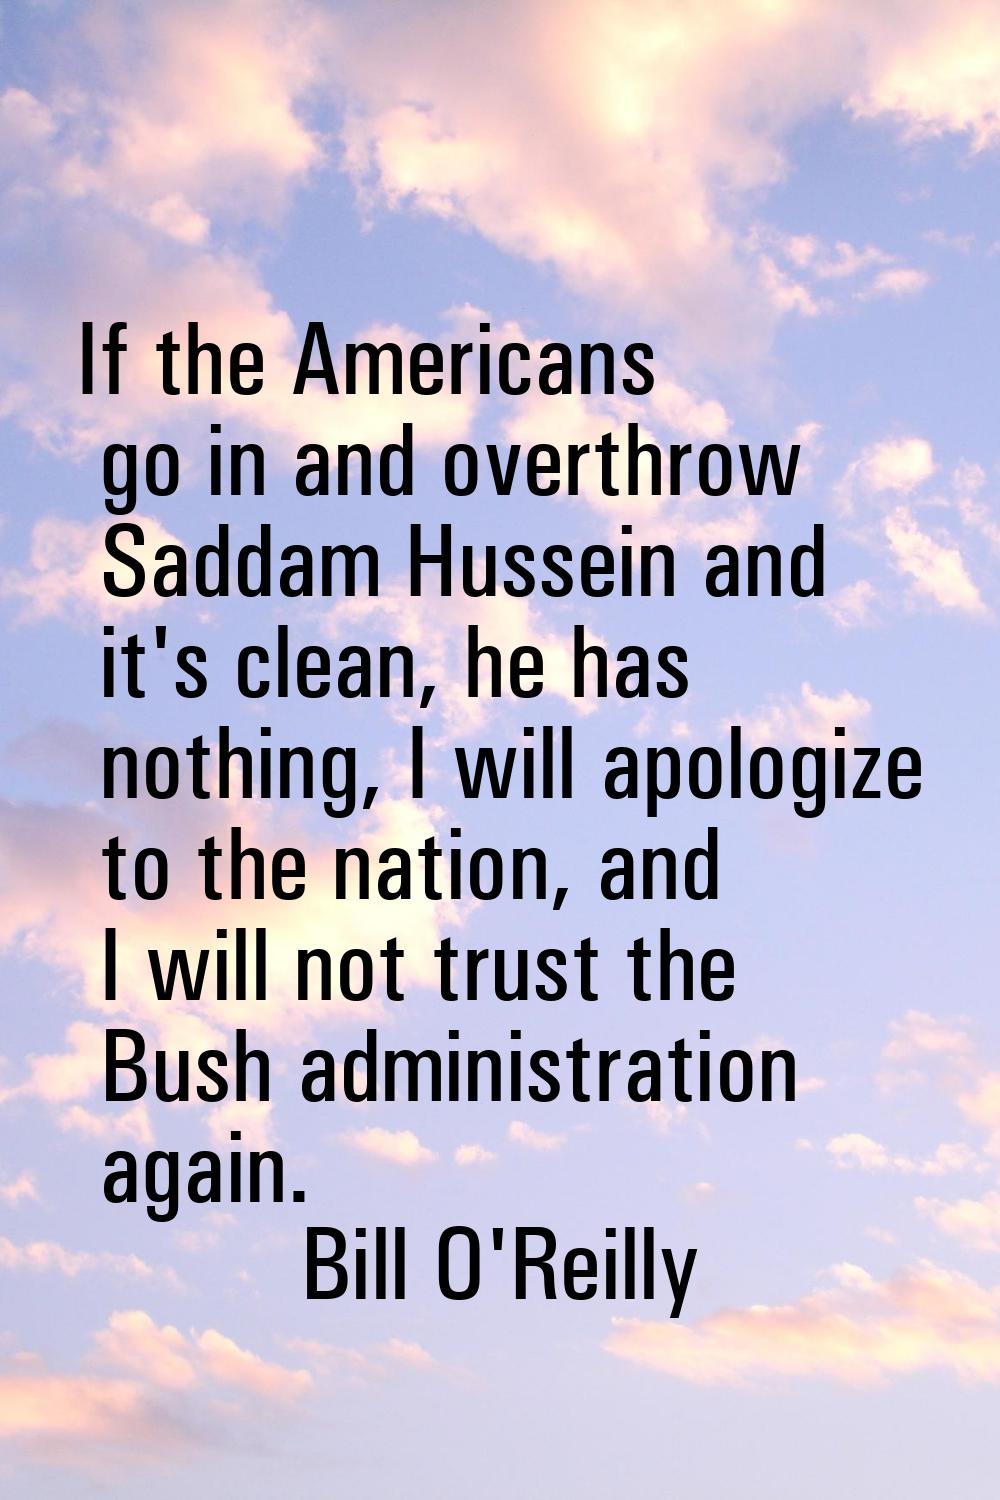 If the Americans go in and overthrow Saddam Hussein and it's clean, he has nothing, I will apologiz